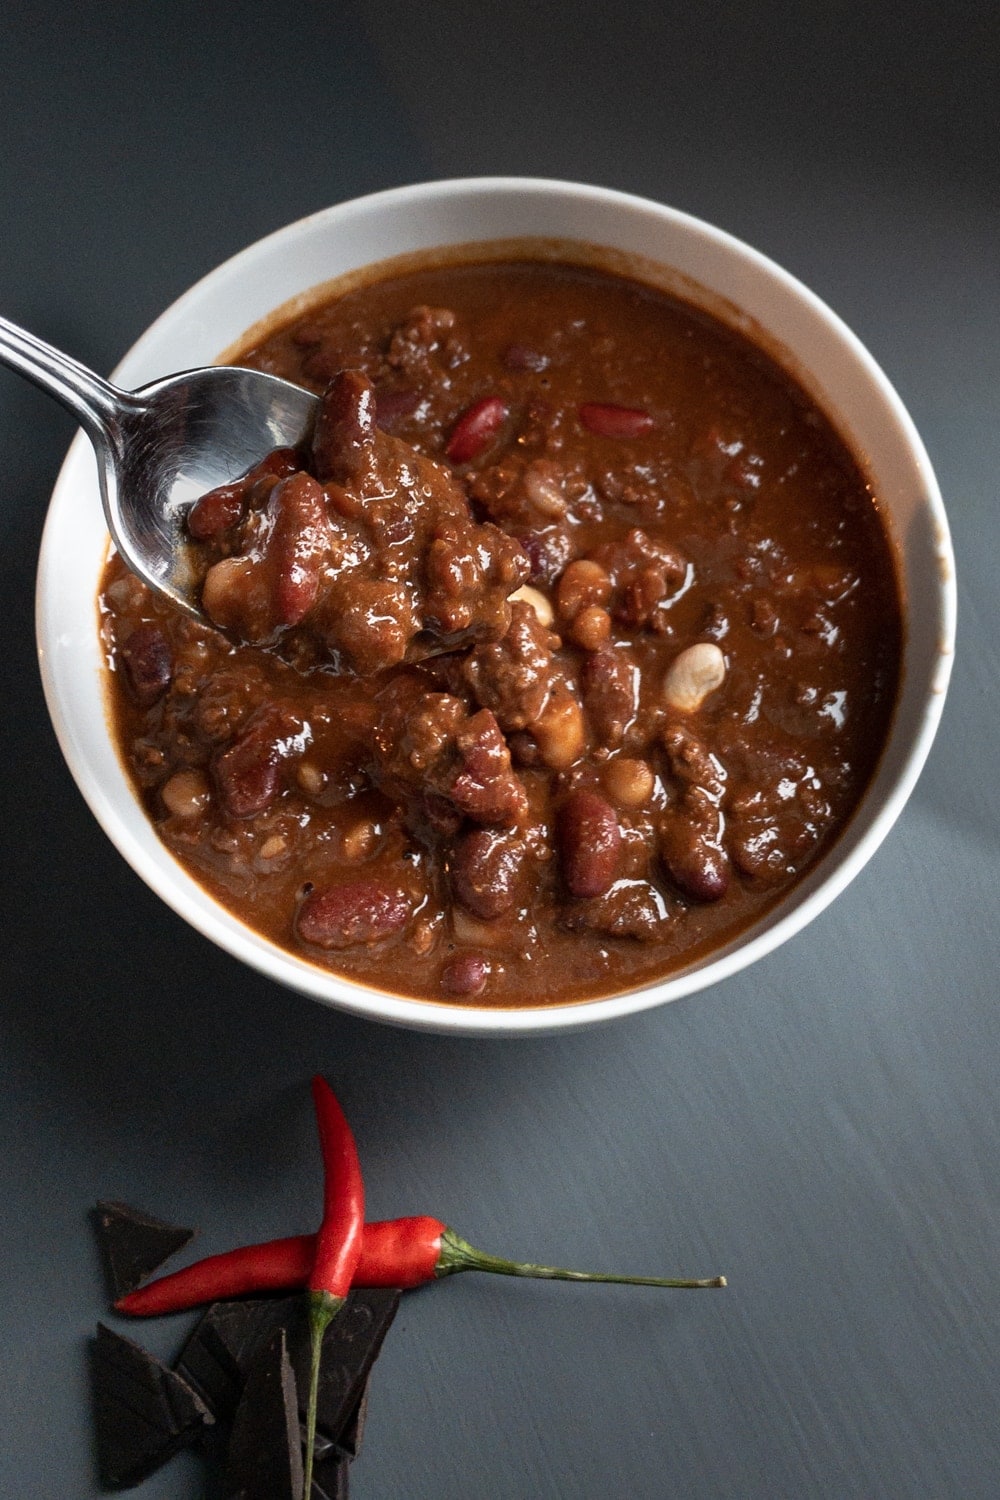 Smoky Chili con Carne in a bowl with a chili and chocolate decoration